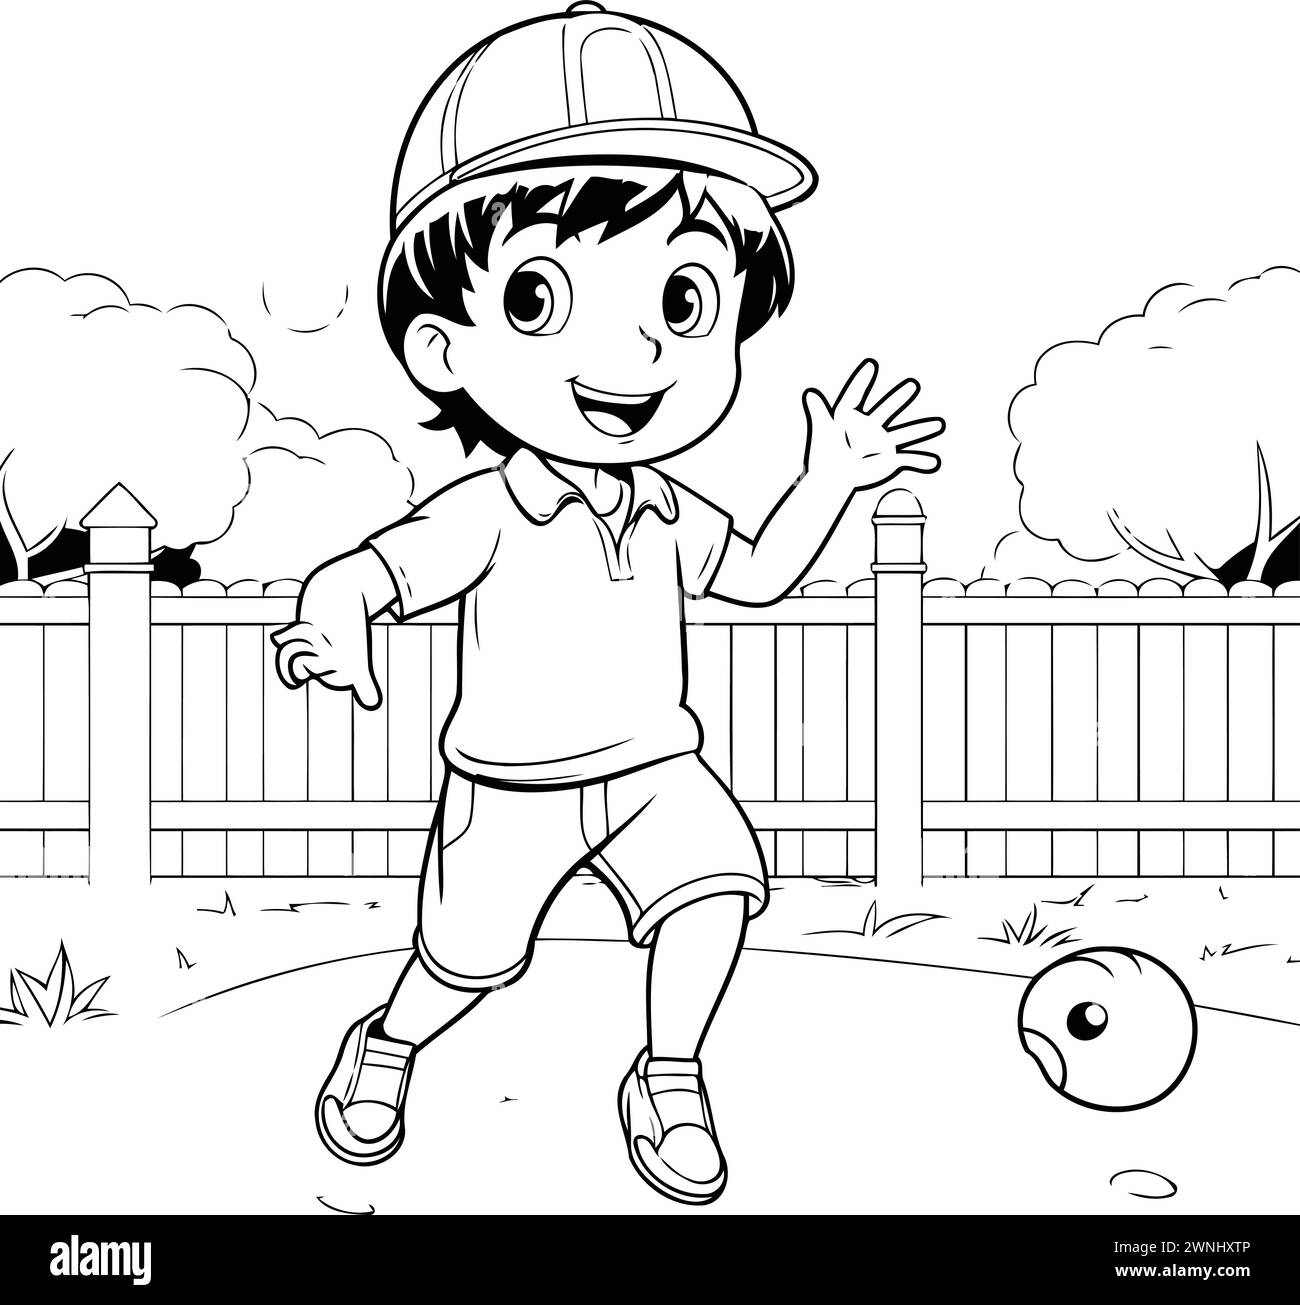 Coloring book for children: Boy playing soccer. Vector illustration. Stock Vector